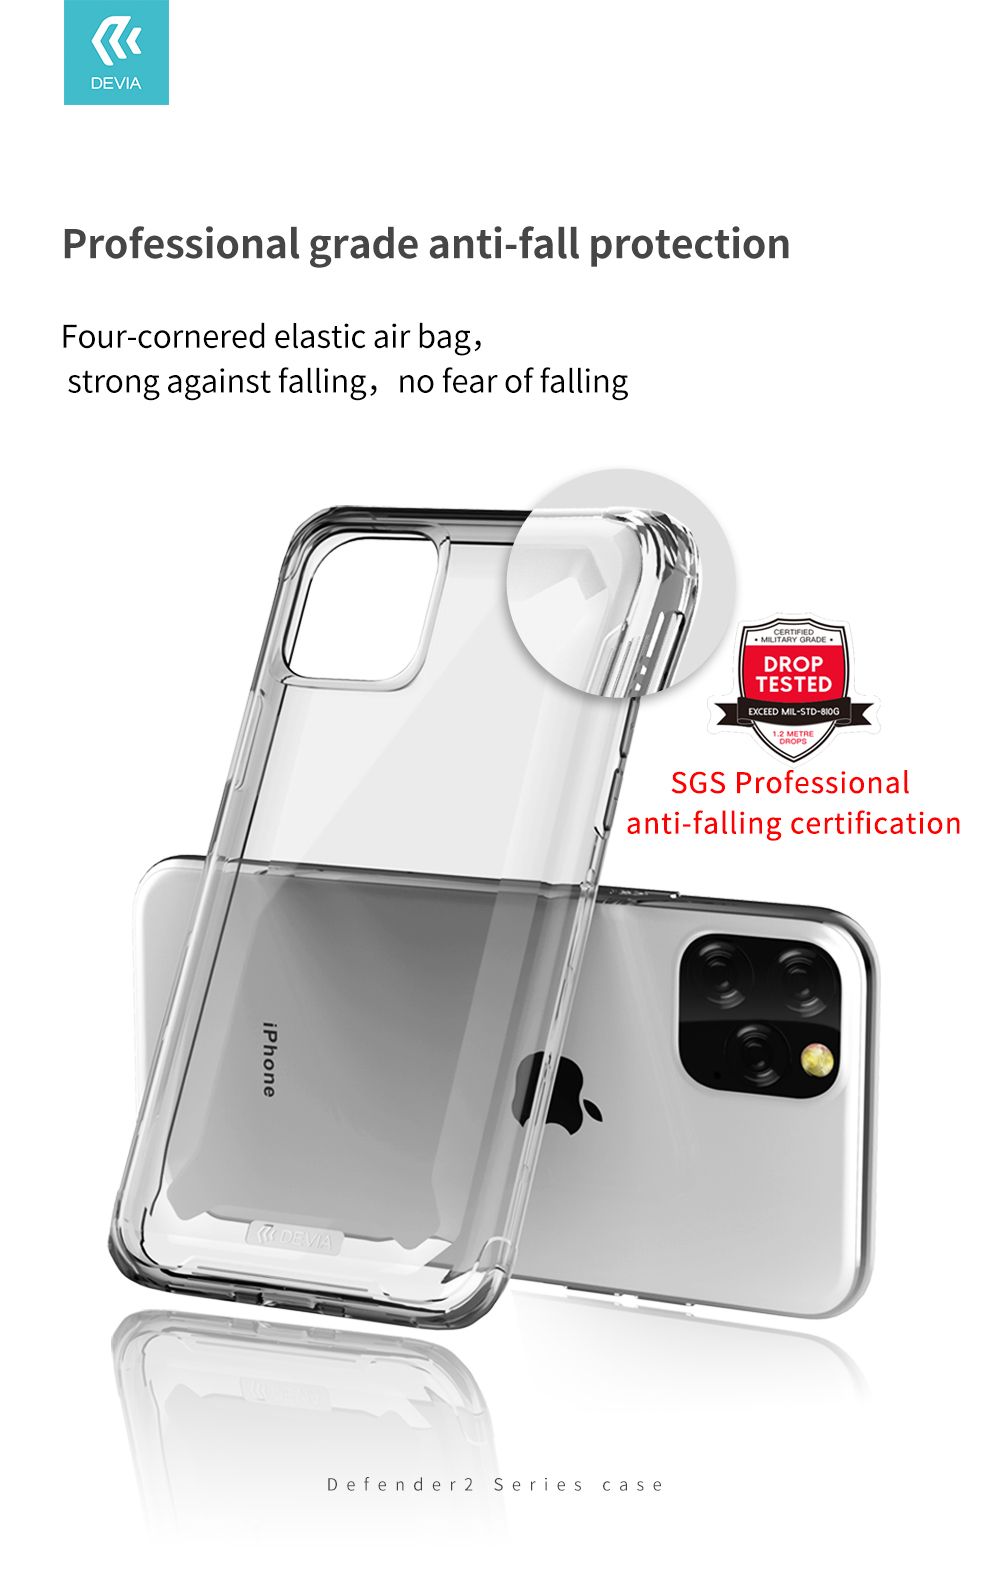 Devia Defender 2 Series Case for iPhone 11, iPhone 11 Pro and iPhone 11 Pro Max